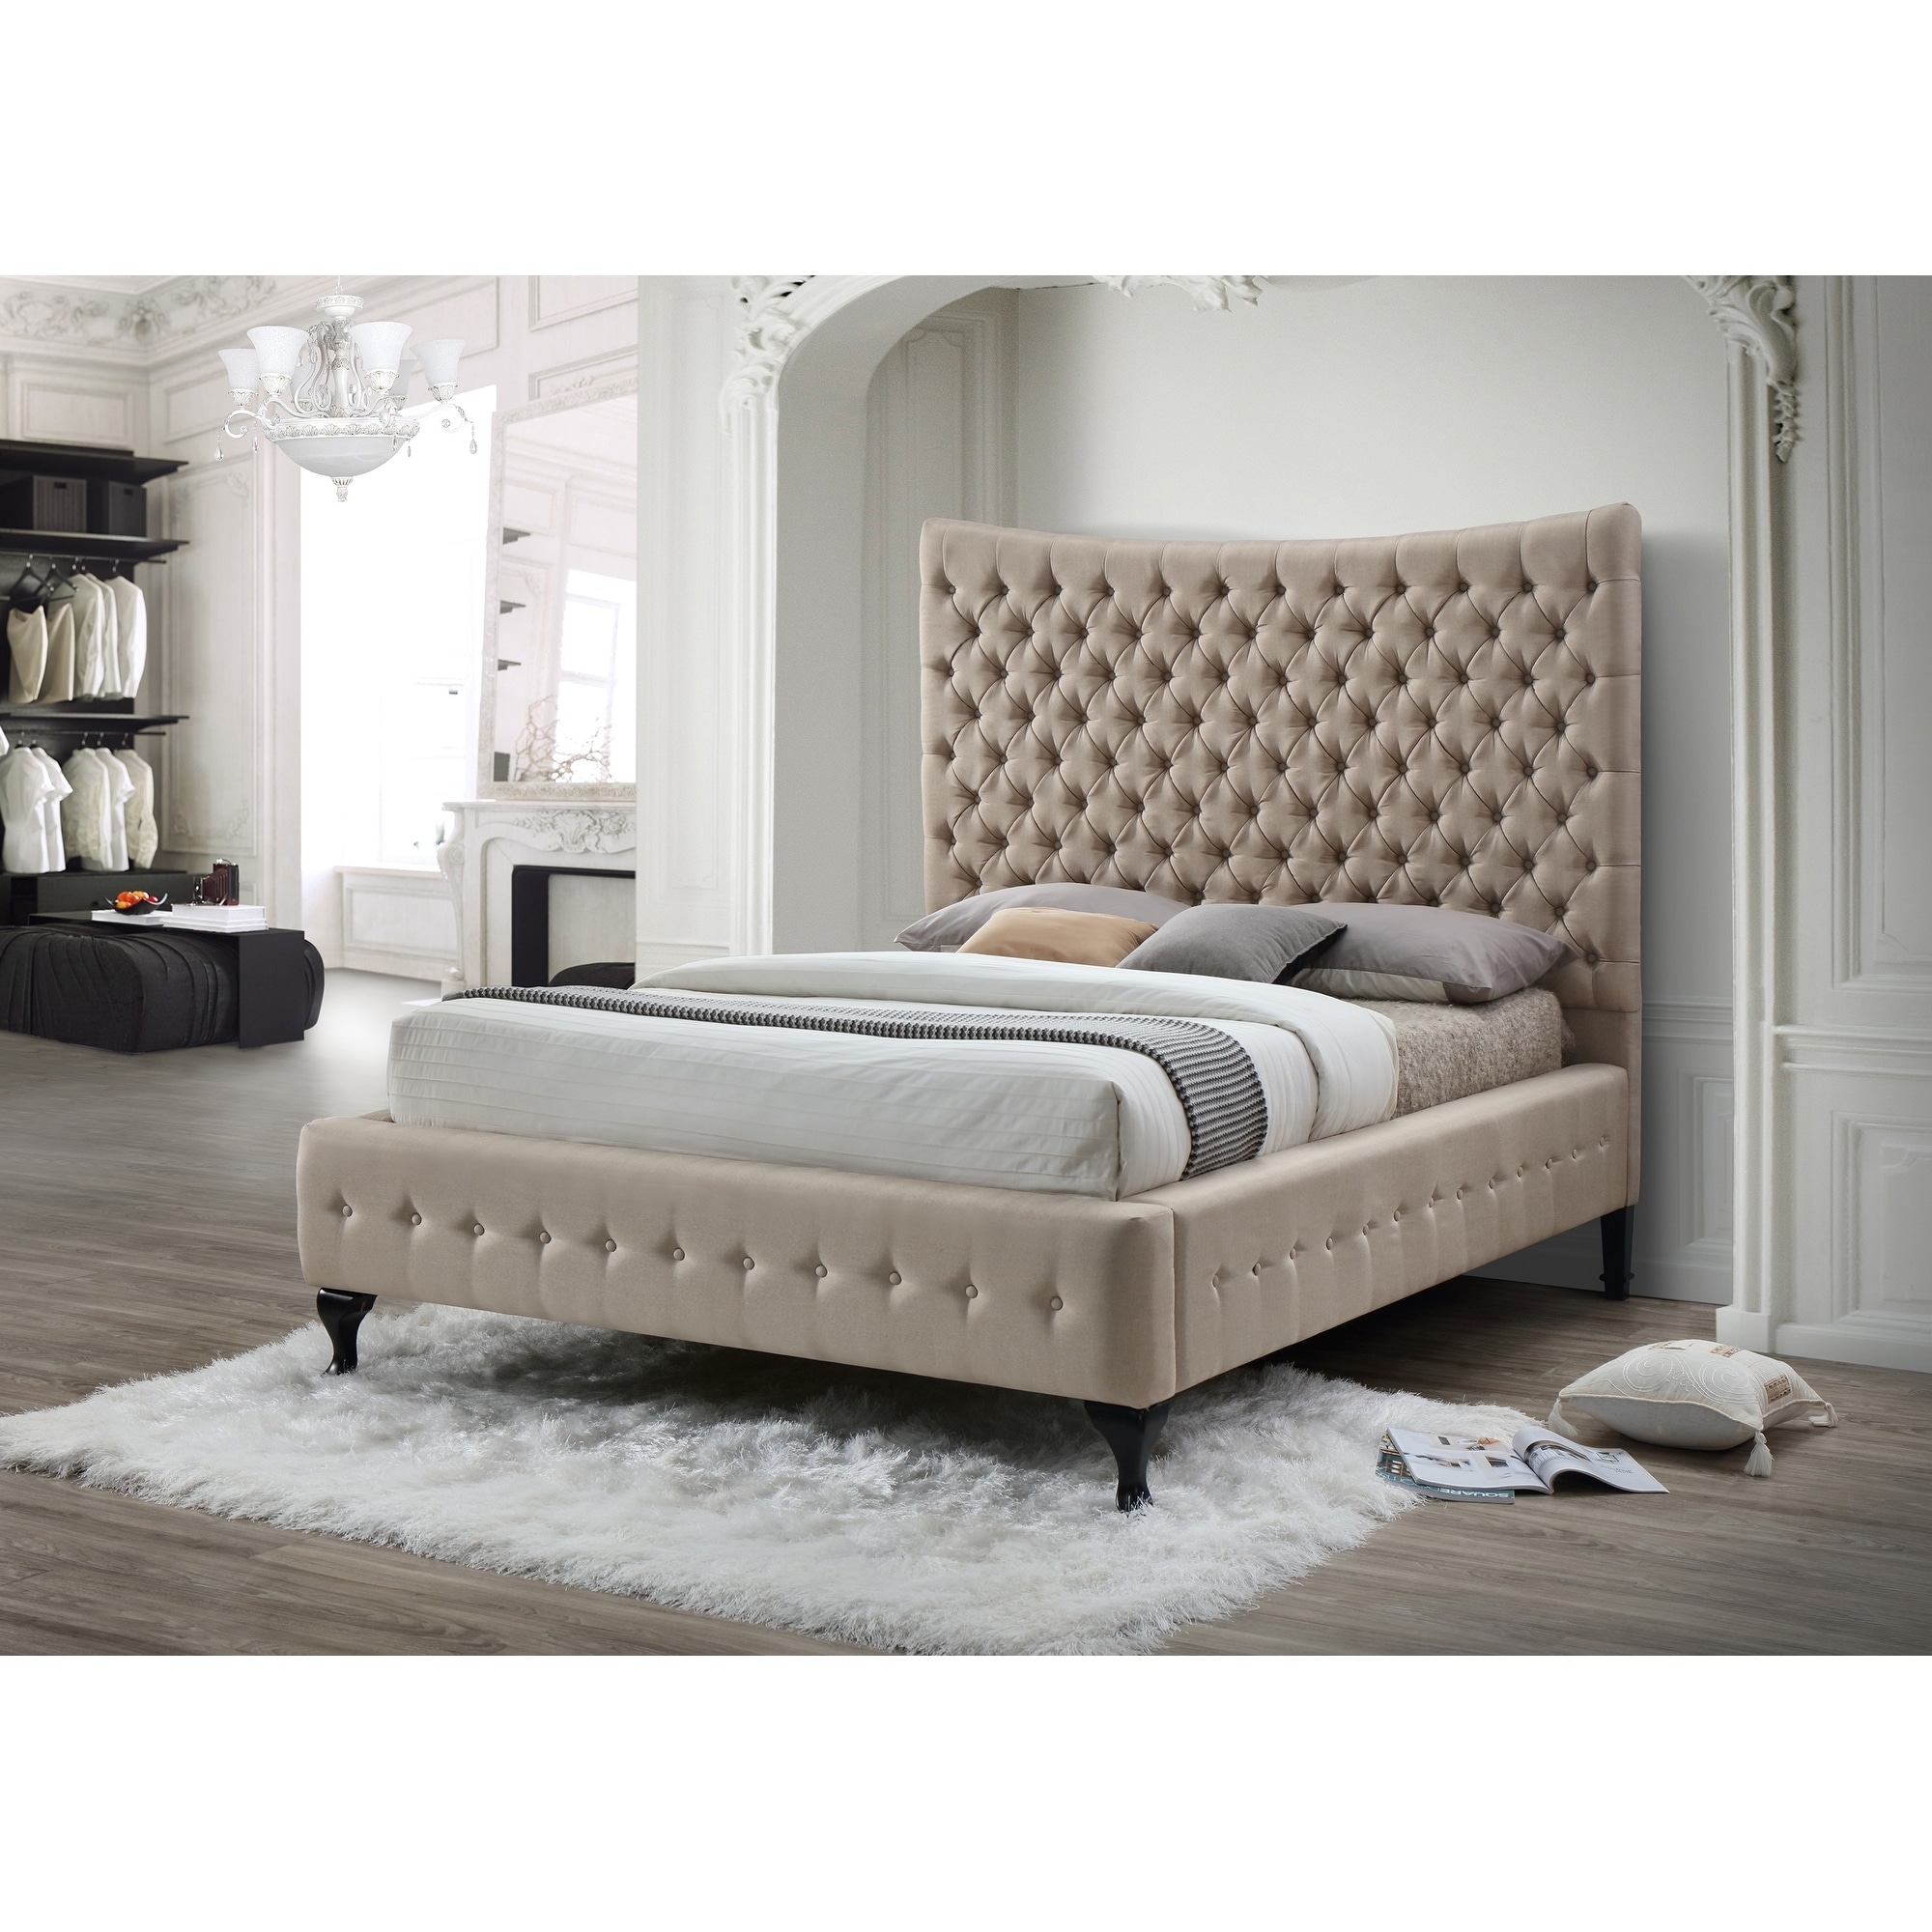 Beige Tufted Classic Linen Queen Platform Bed With A 75 In Tall Headboard No Box Spring Required Overstock 25613673